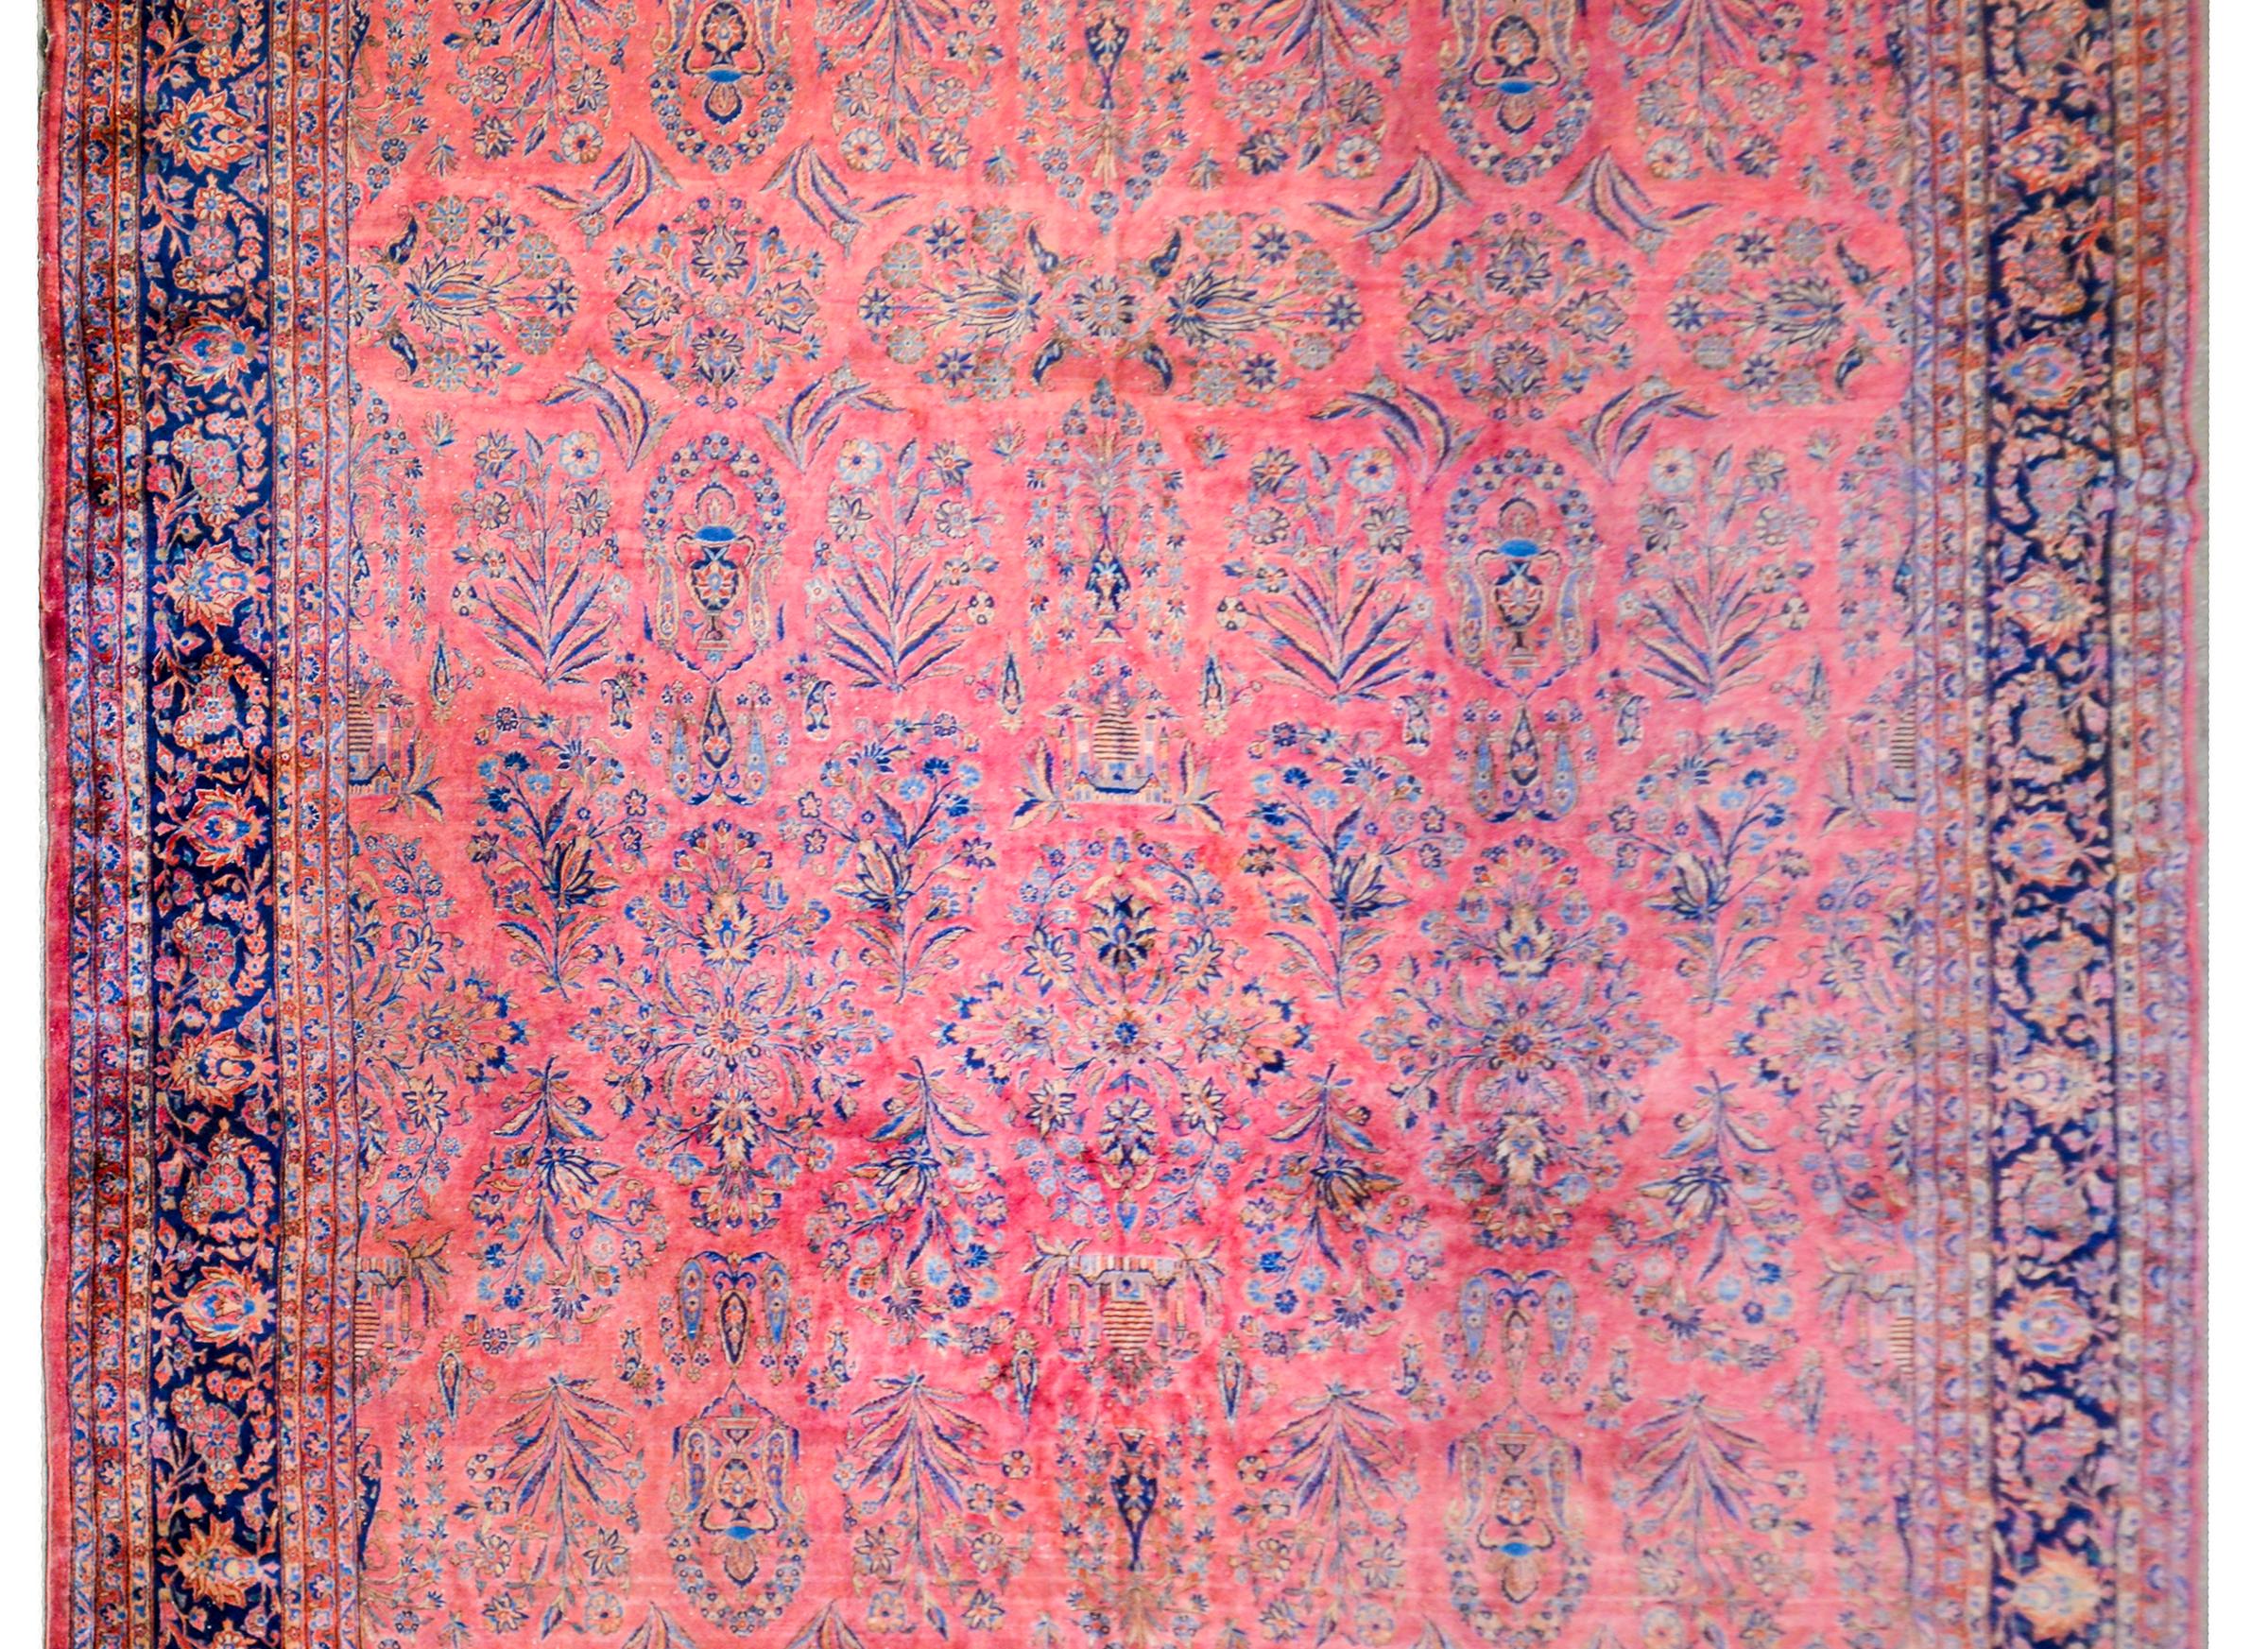 A grand 1920s Persian Kashan rug with a fantastic finely rendered pattern containing myriad flowers woven in light and dark indigo, beige, and gold, on a brilliant cranberry colored background. The border is complex with multiple pairs of petite